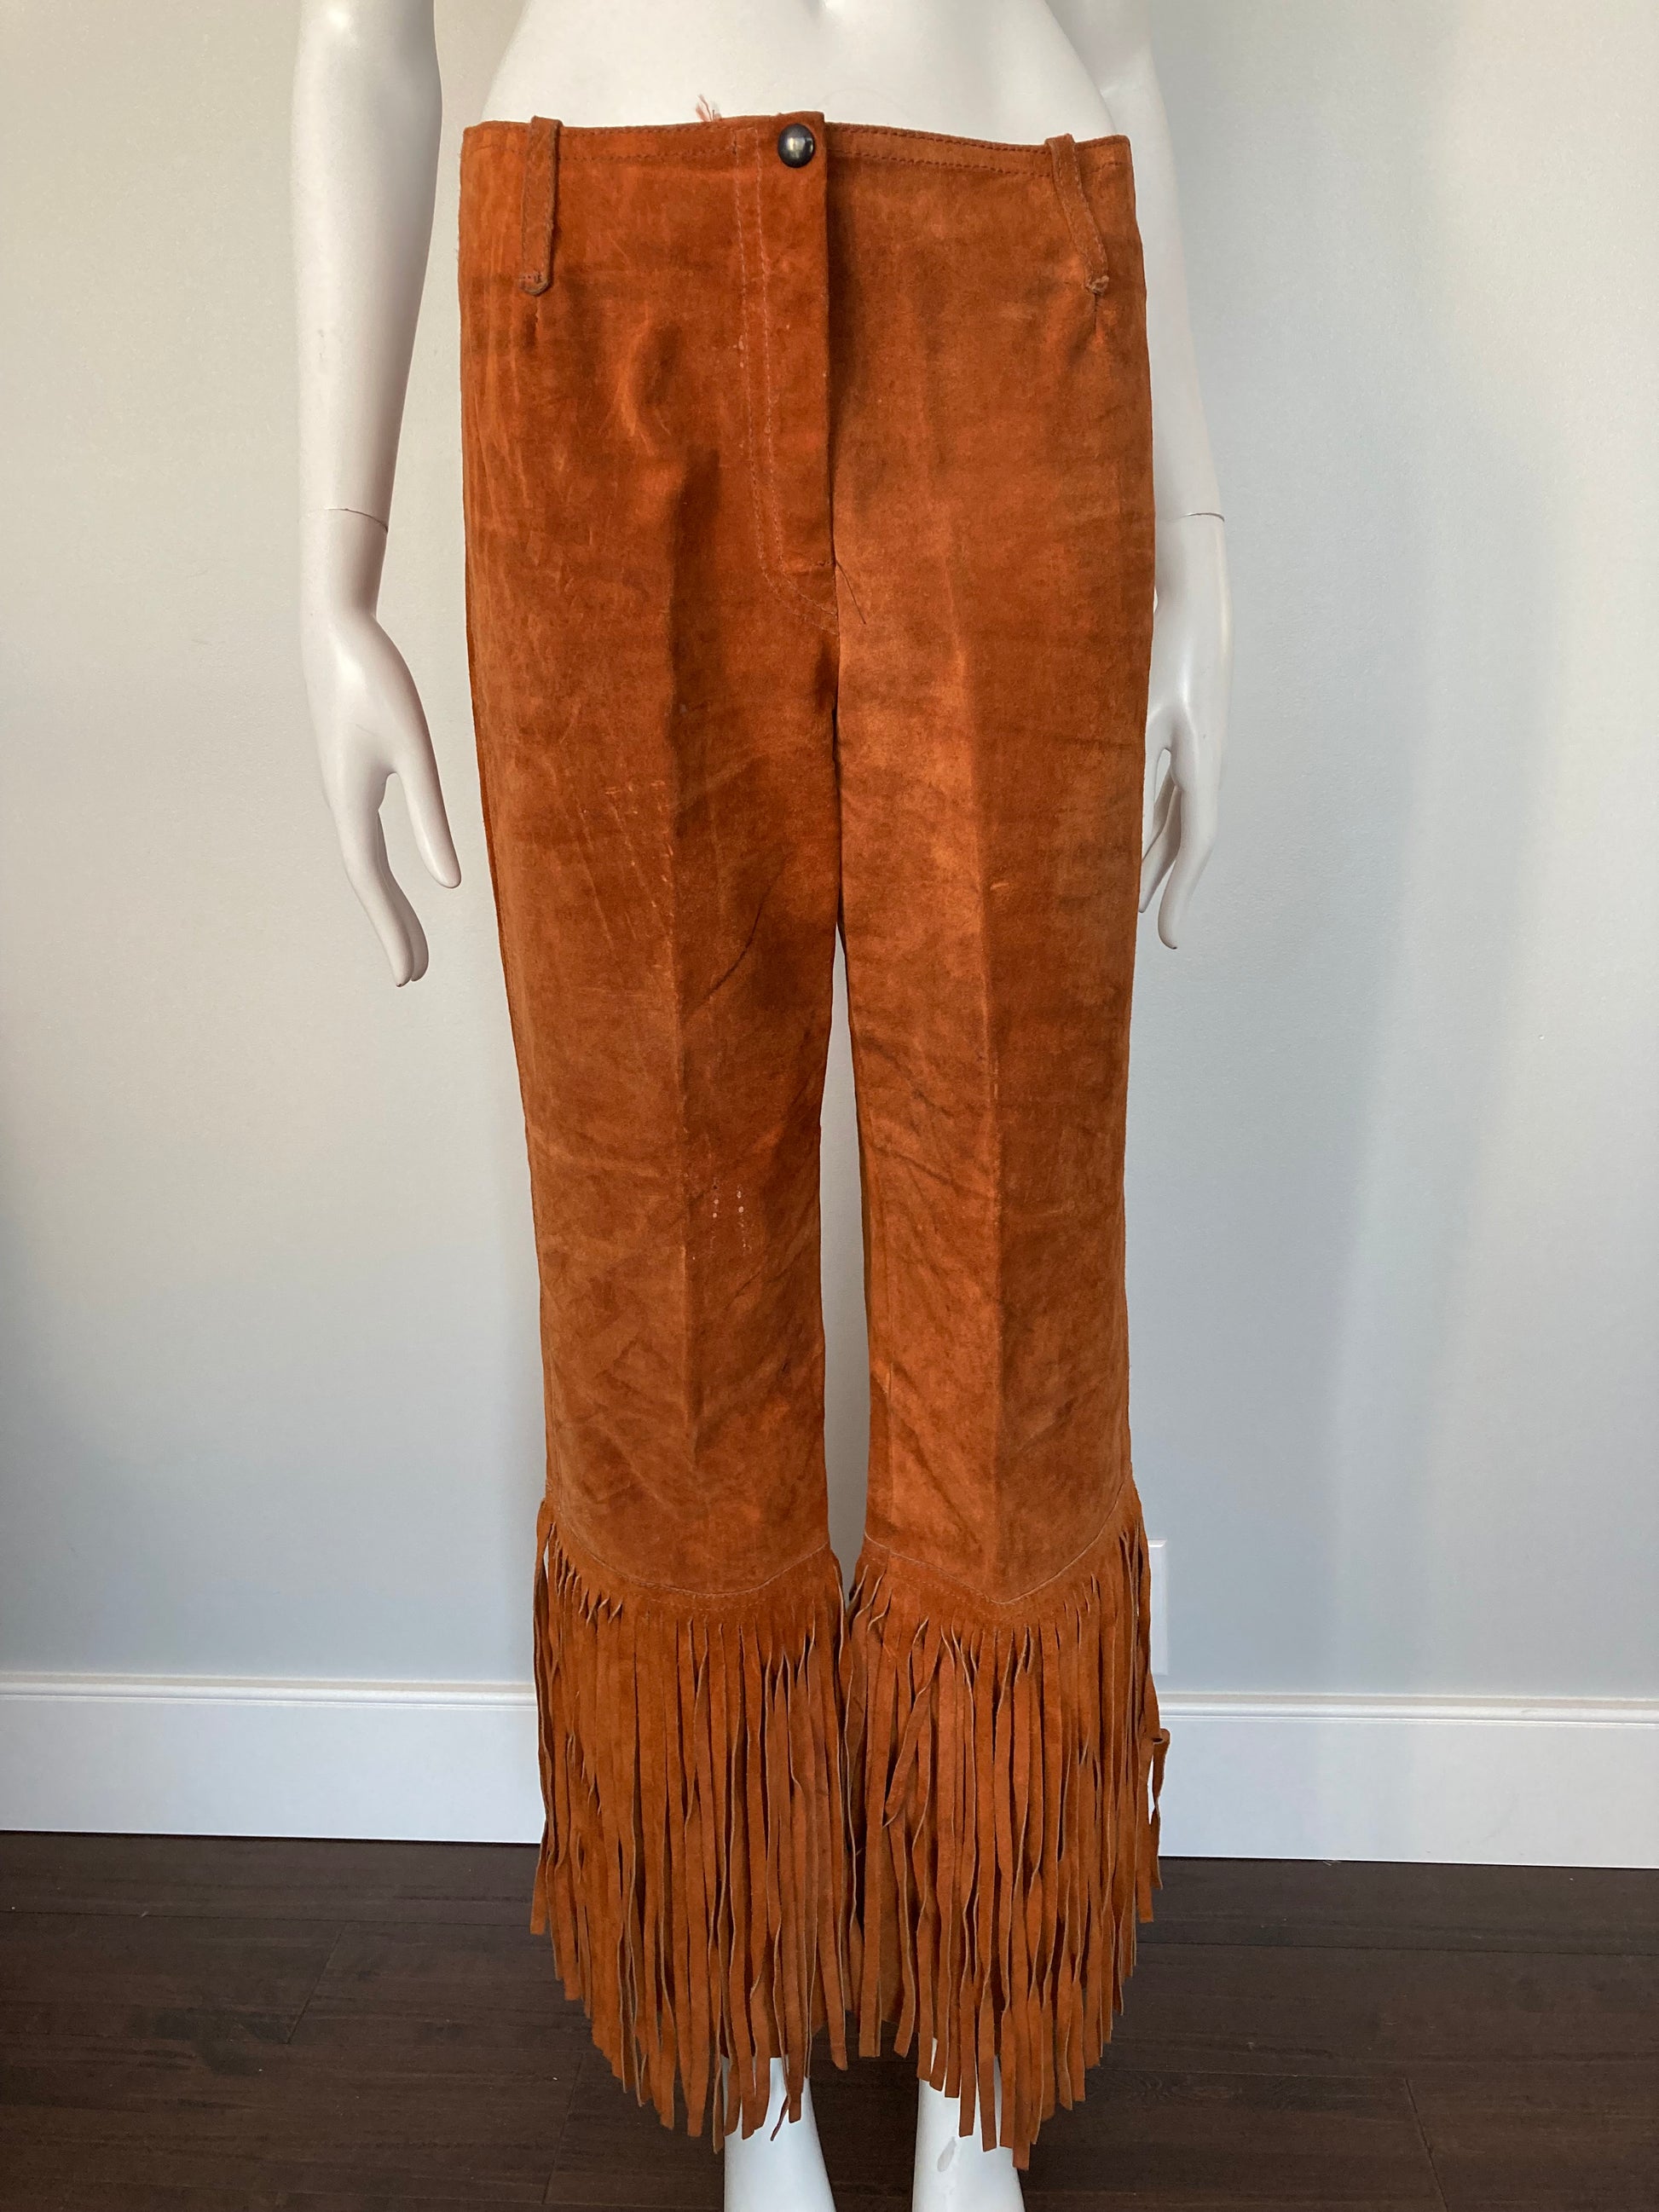 3 Pce 60/70s Fringe and Patchwork Suede Pant, Vest and Cape